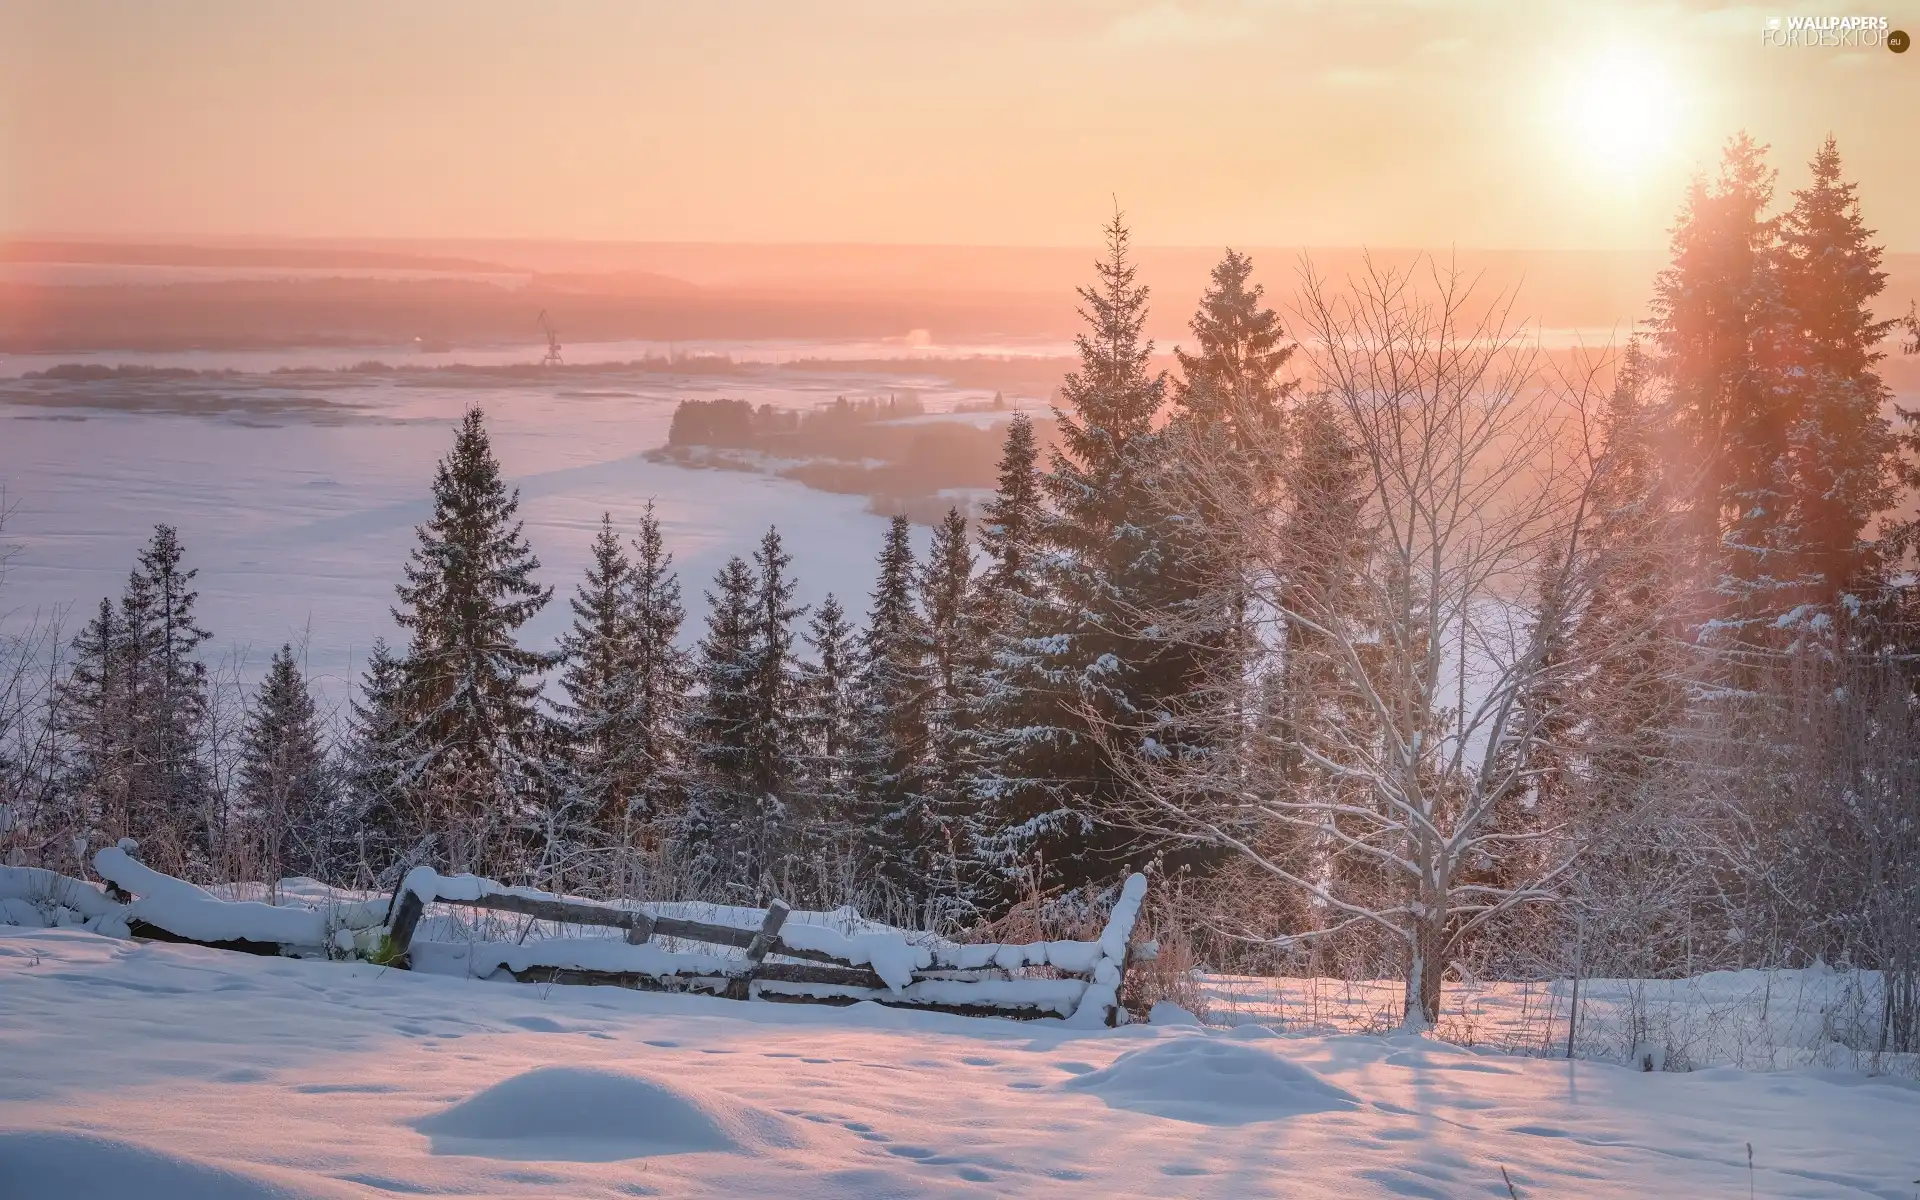 Sunrise, winter, viewes, fence, trees, snow